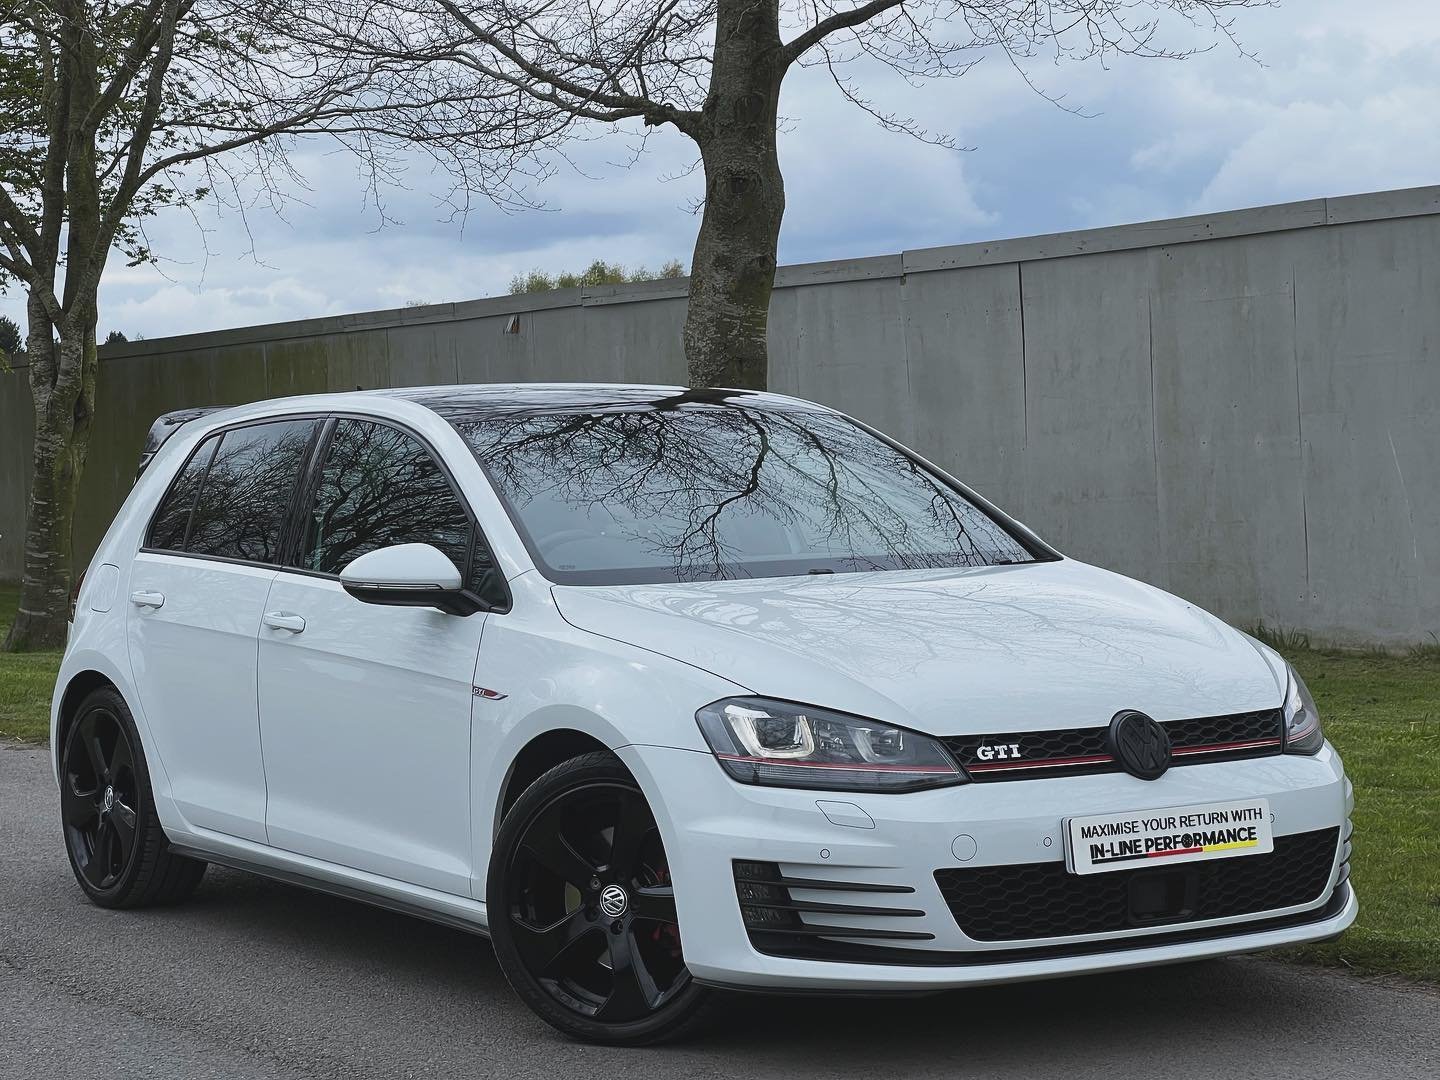 Here At IN-LINE PERFORMANCE We Take Pride And Joy Into Supplying You With Great Quality Vehicles. Here We Present To You This 2015  VW Golf GTI Finished In Metallic White.
We have Taken Into Consideration Its Desirable Specification Such As : Black L